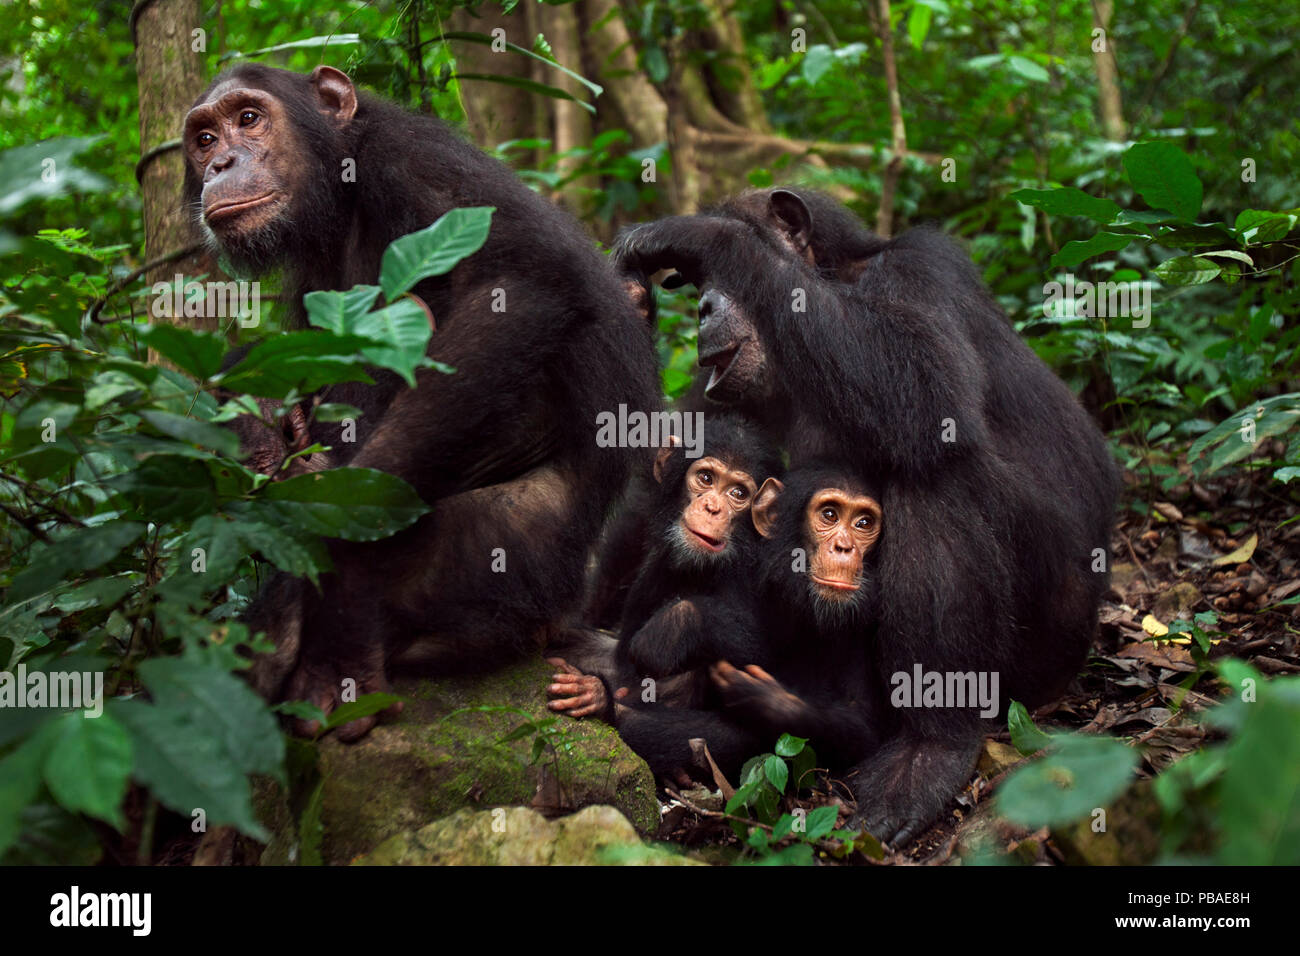 Eastern chimpanzee (Pan troglodytes schweinfurtheii) female 'Gremlin' aged 41 years grooms her daughter 'Golden' aged 14 years while their infants 'Gizmo' aged 3 years and 'Glamma' aged 9 months sit between them. Gombe National Park, Tanzania. May 2012. Stock Photo